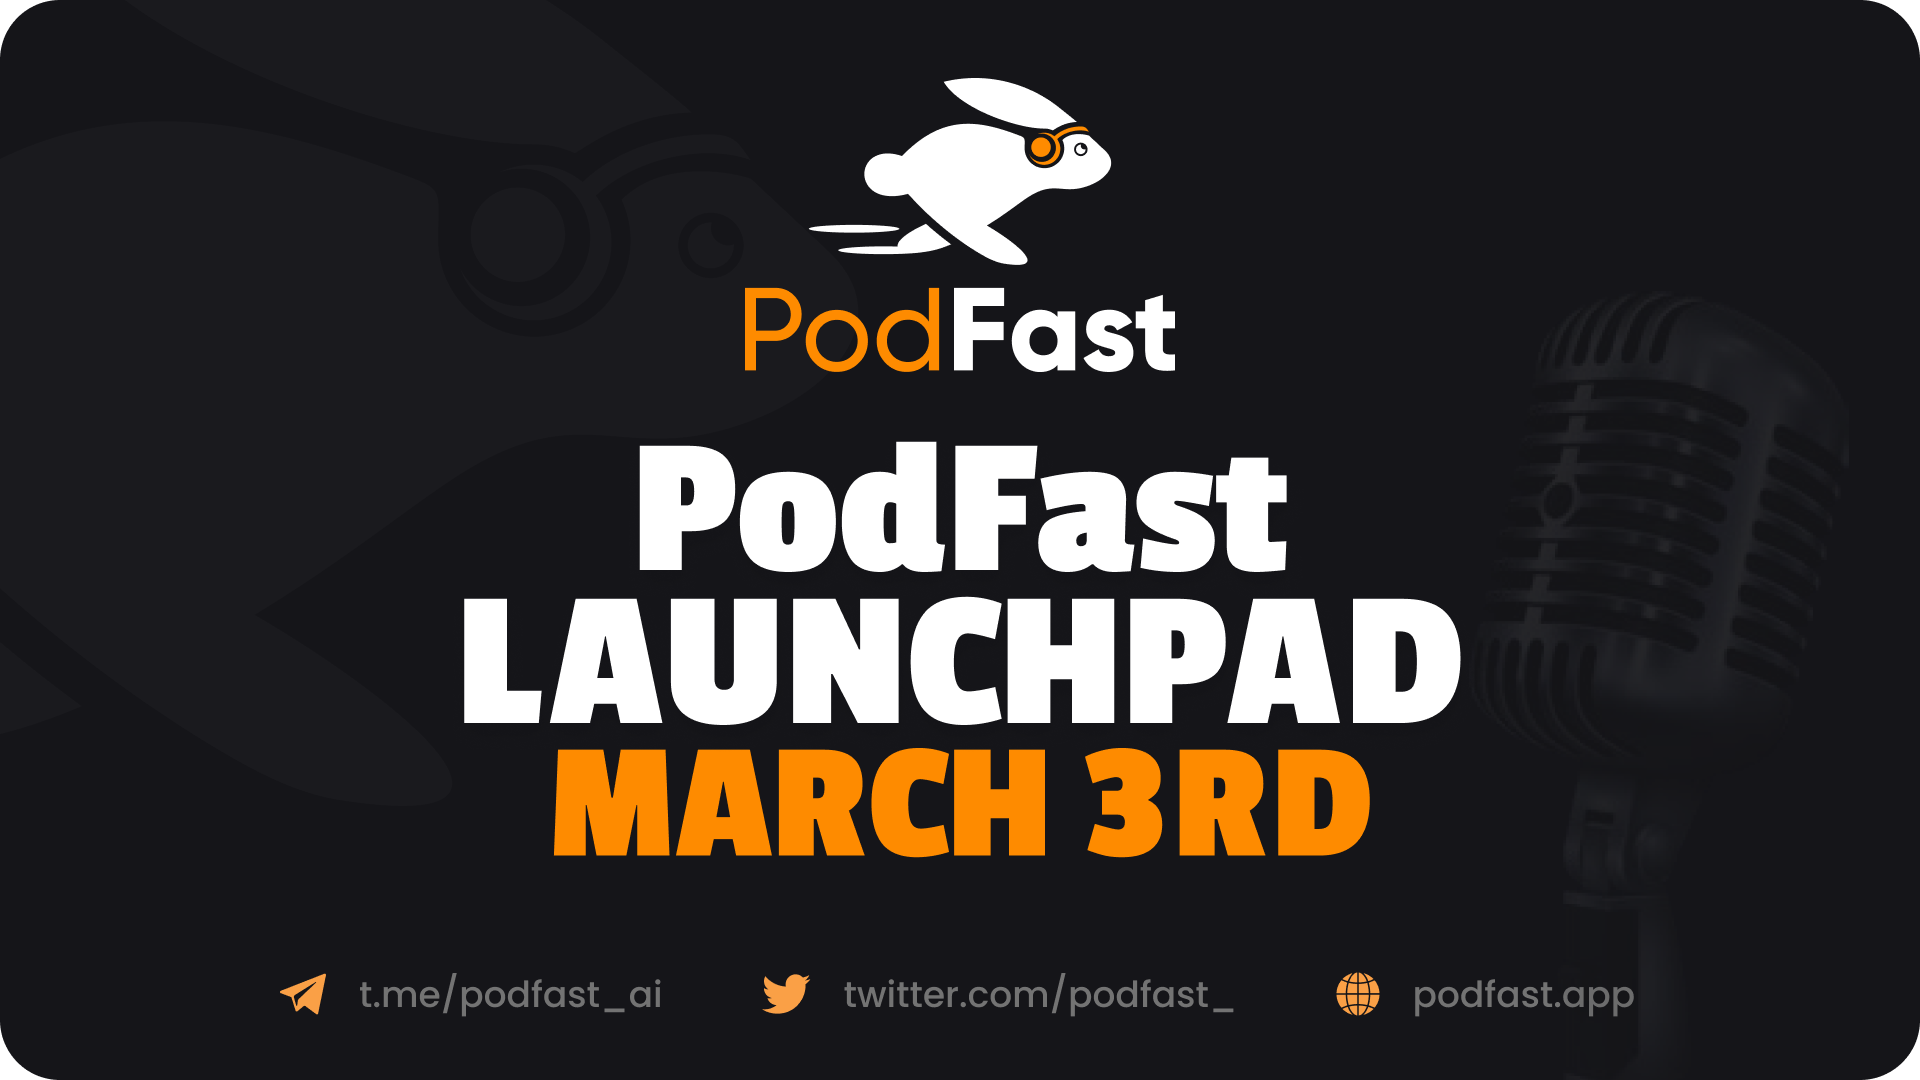 PodFast Announces Token Offering March 3rd on TrustSwap Launchpad